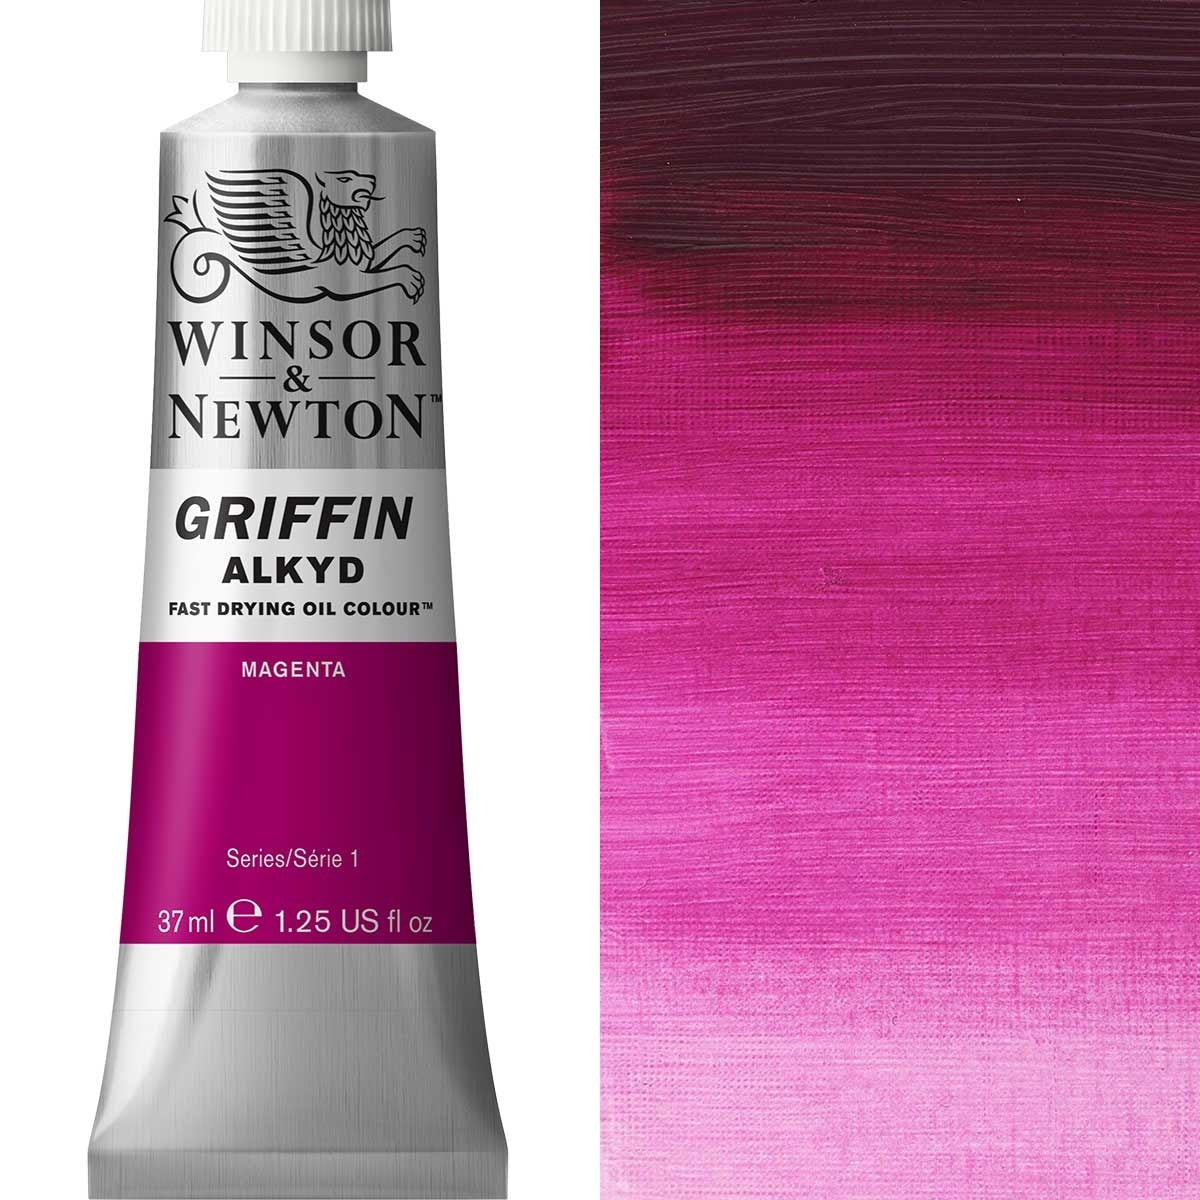 Winsor and Newton - Griffin ALKYD Oil Colour - 37ml - Magenta